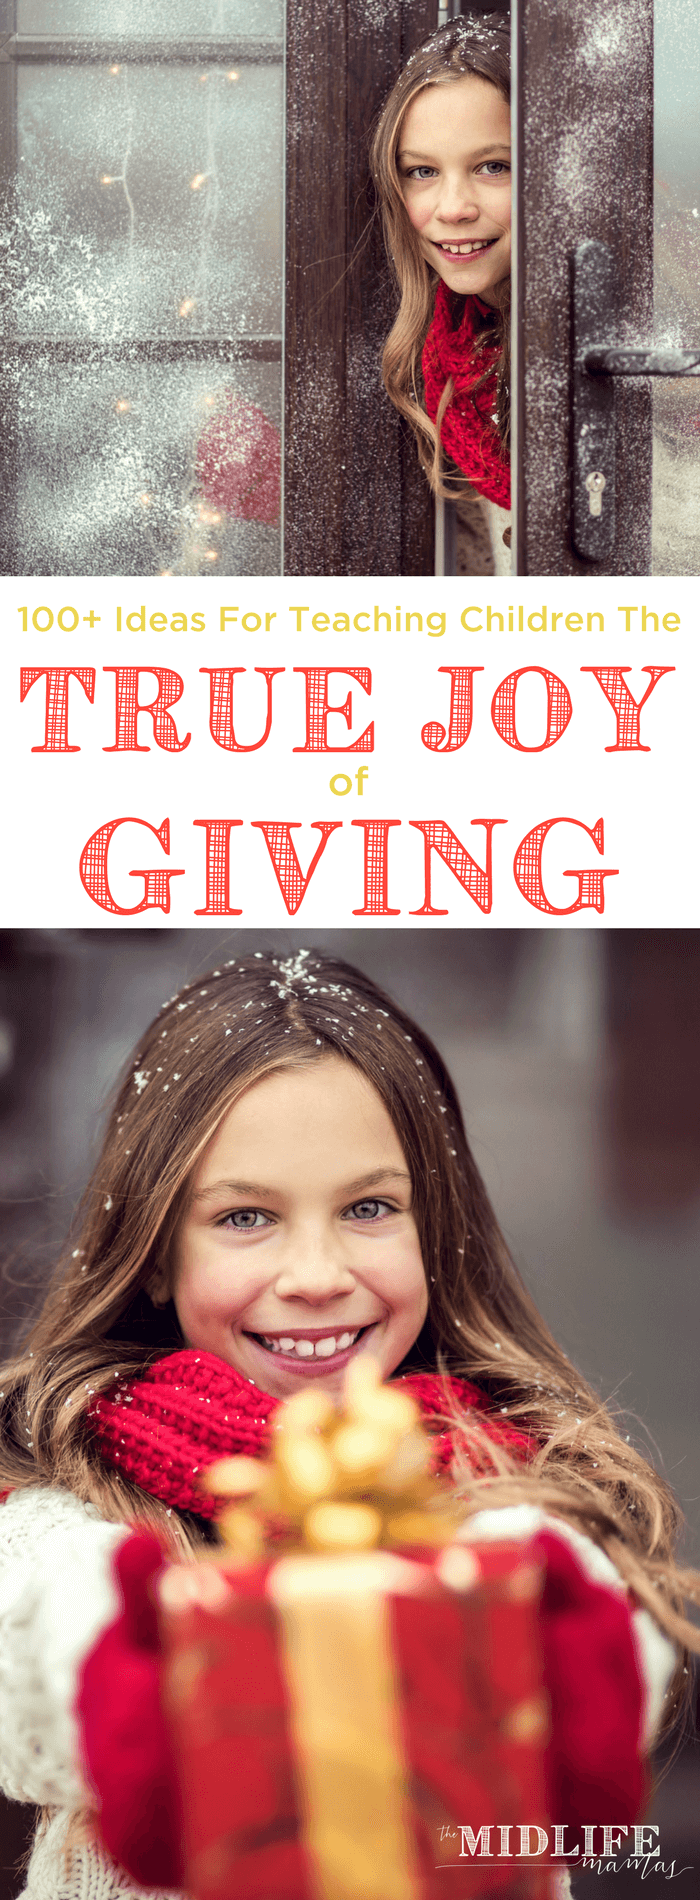 If you want ideas, service projects, printables and more for Christmas acts of kindness, look no further than this collection of over 100 ideas for Christmas giving for children (and adults) of all ages! #actsofkindness #Christmaskindness www.themidlifemamas.com